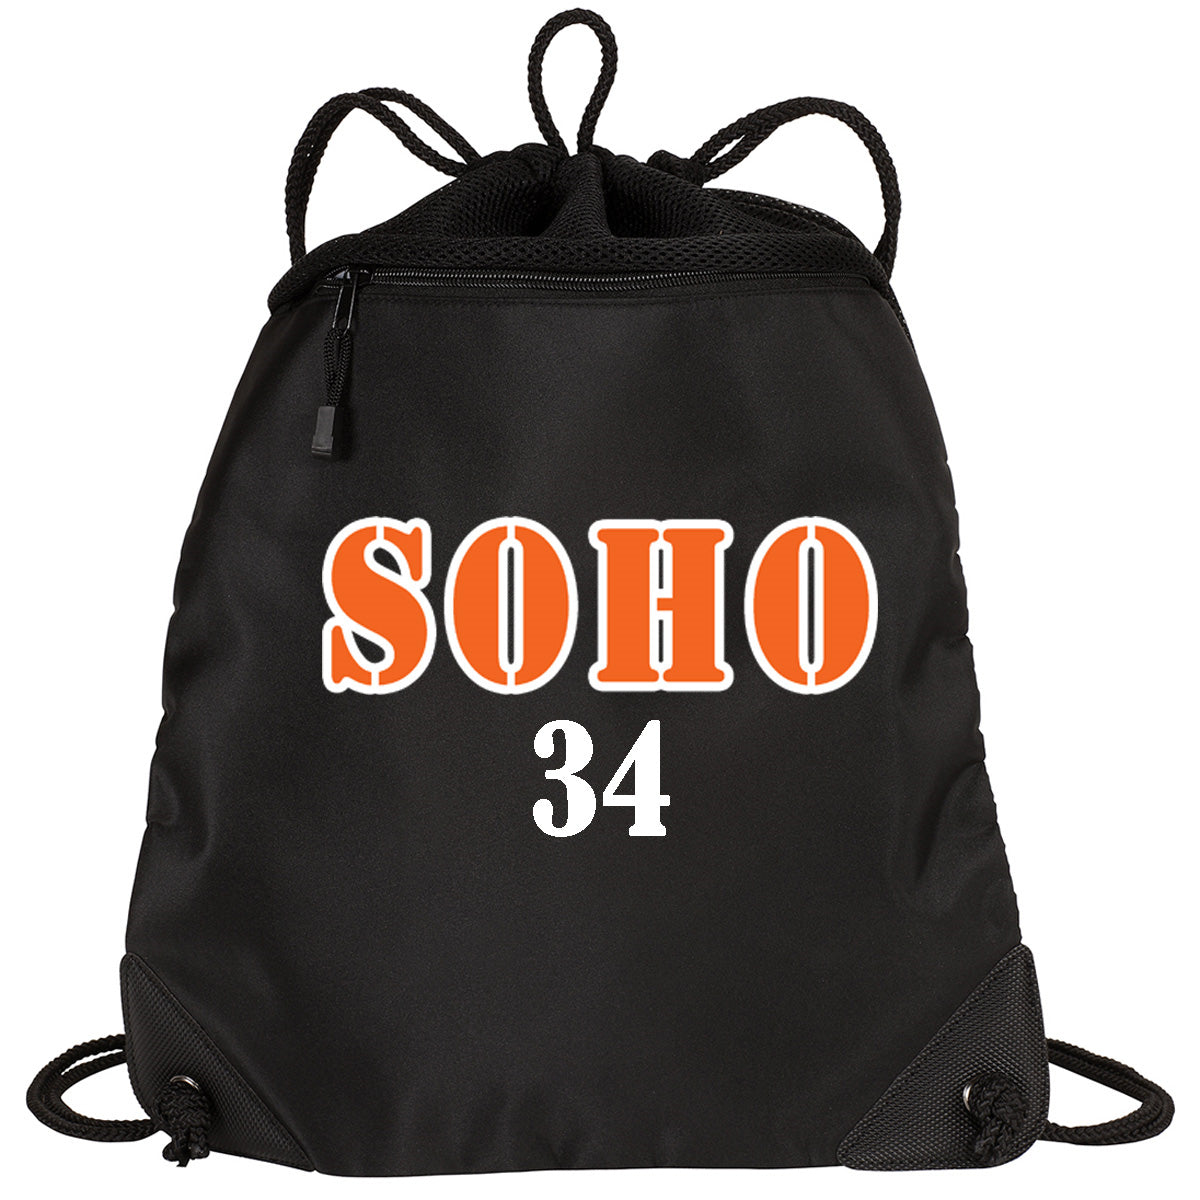 SOHO - Cinch Backpack with SOHO (Stencil Font) - Black (BG810) - Southern Grace Creations